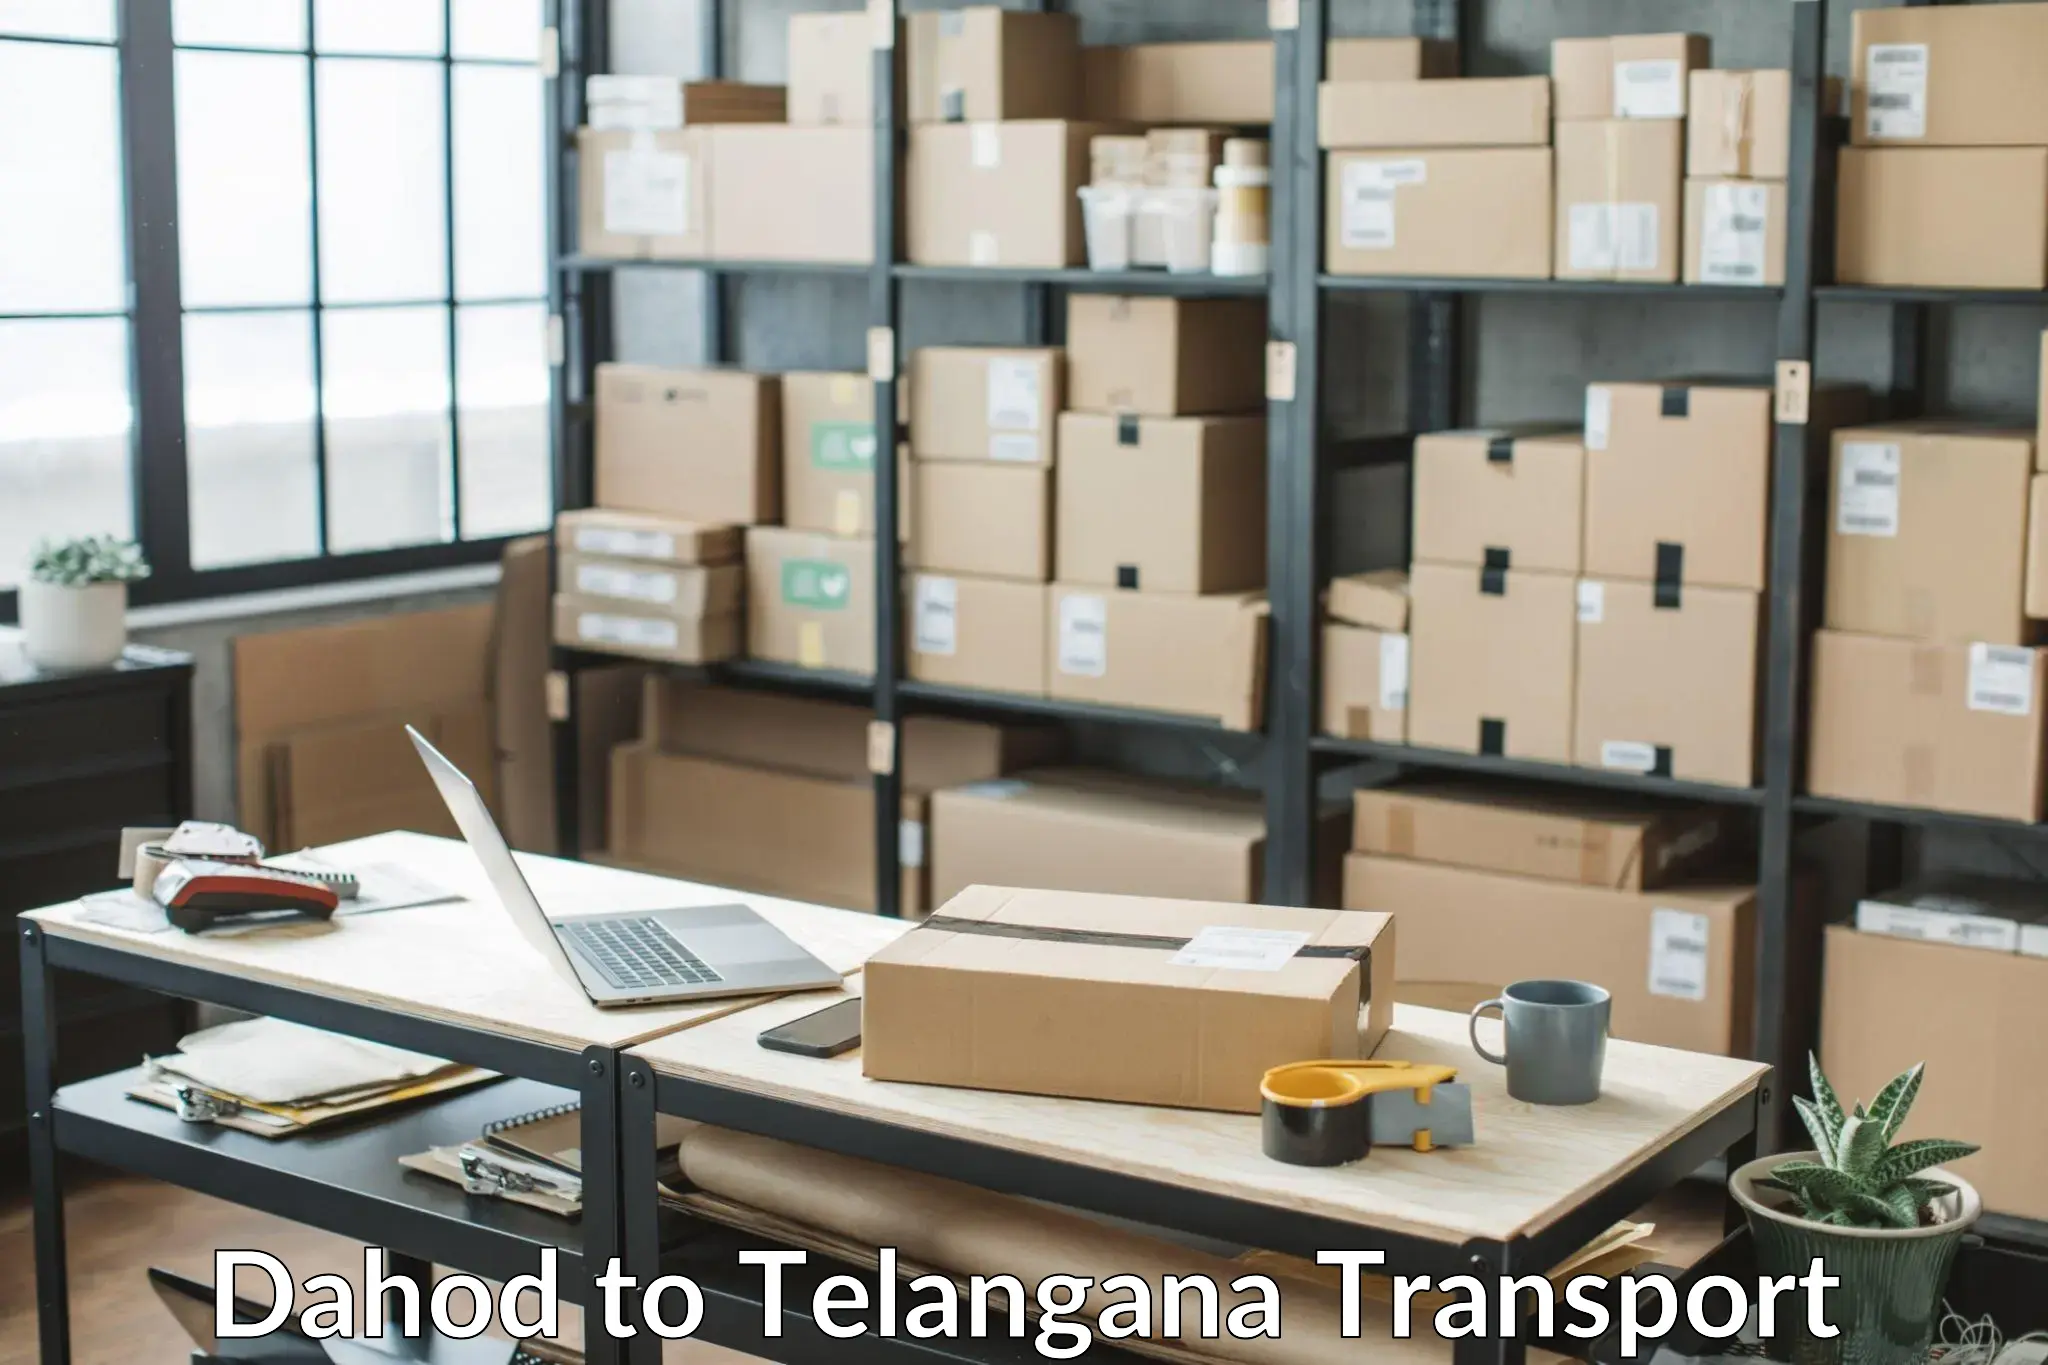 Goods delivery service Dahod to Warangal